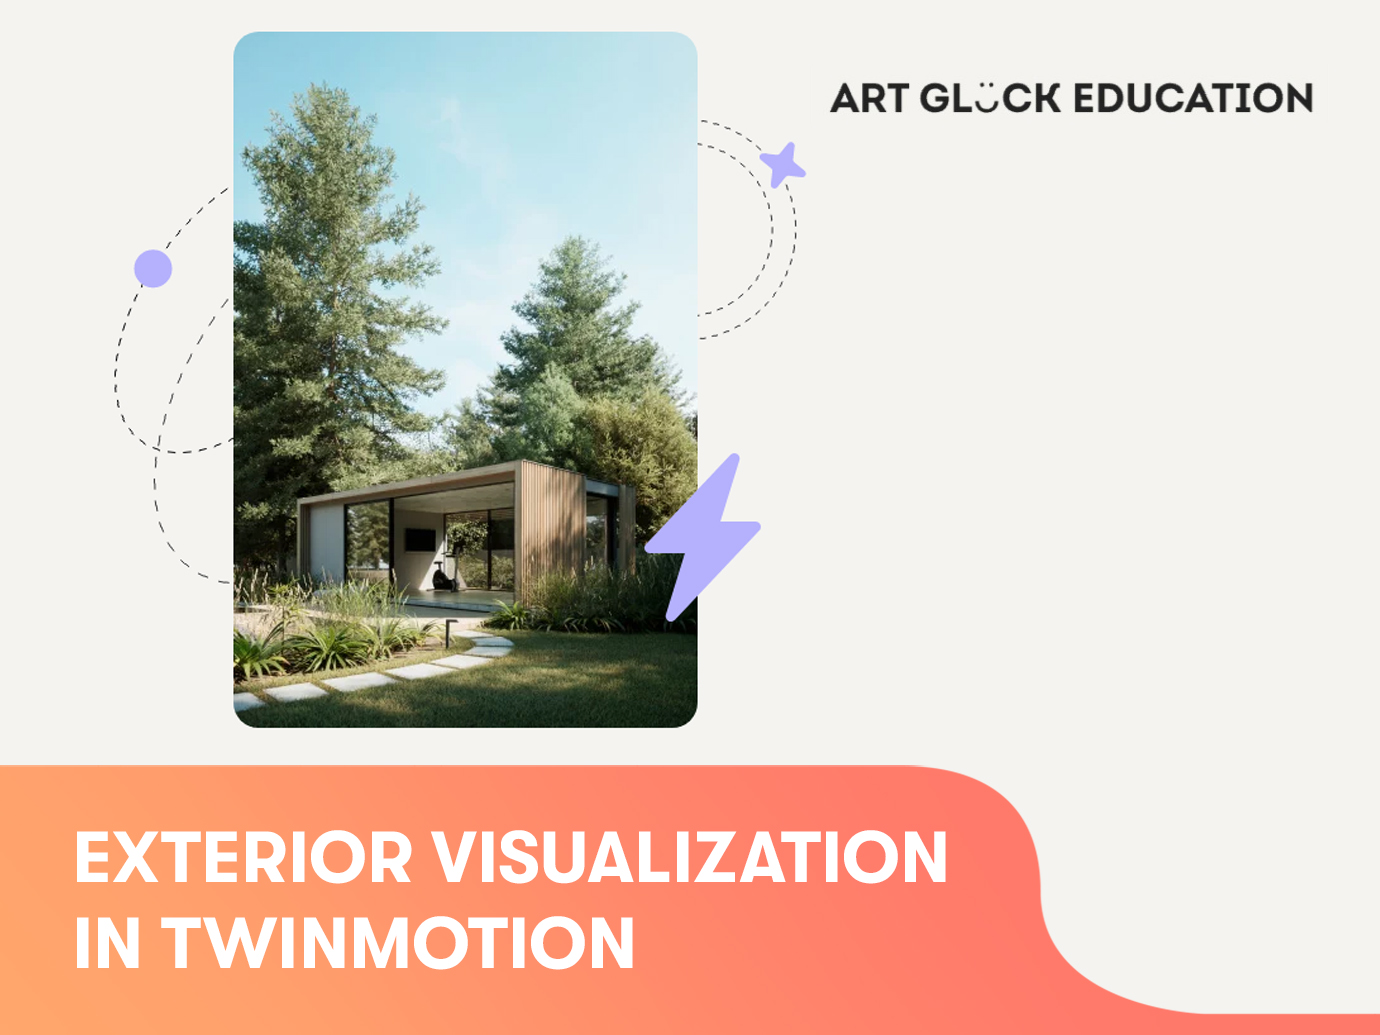 EXTERIOR VISUALIZATION IN TWINMOTION